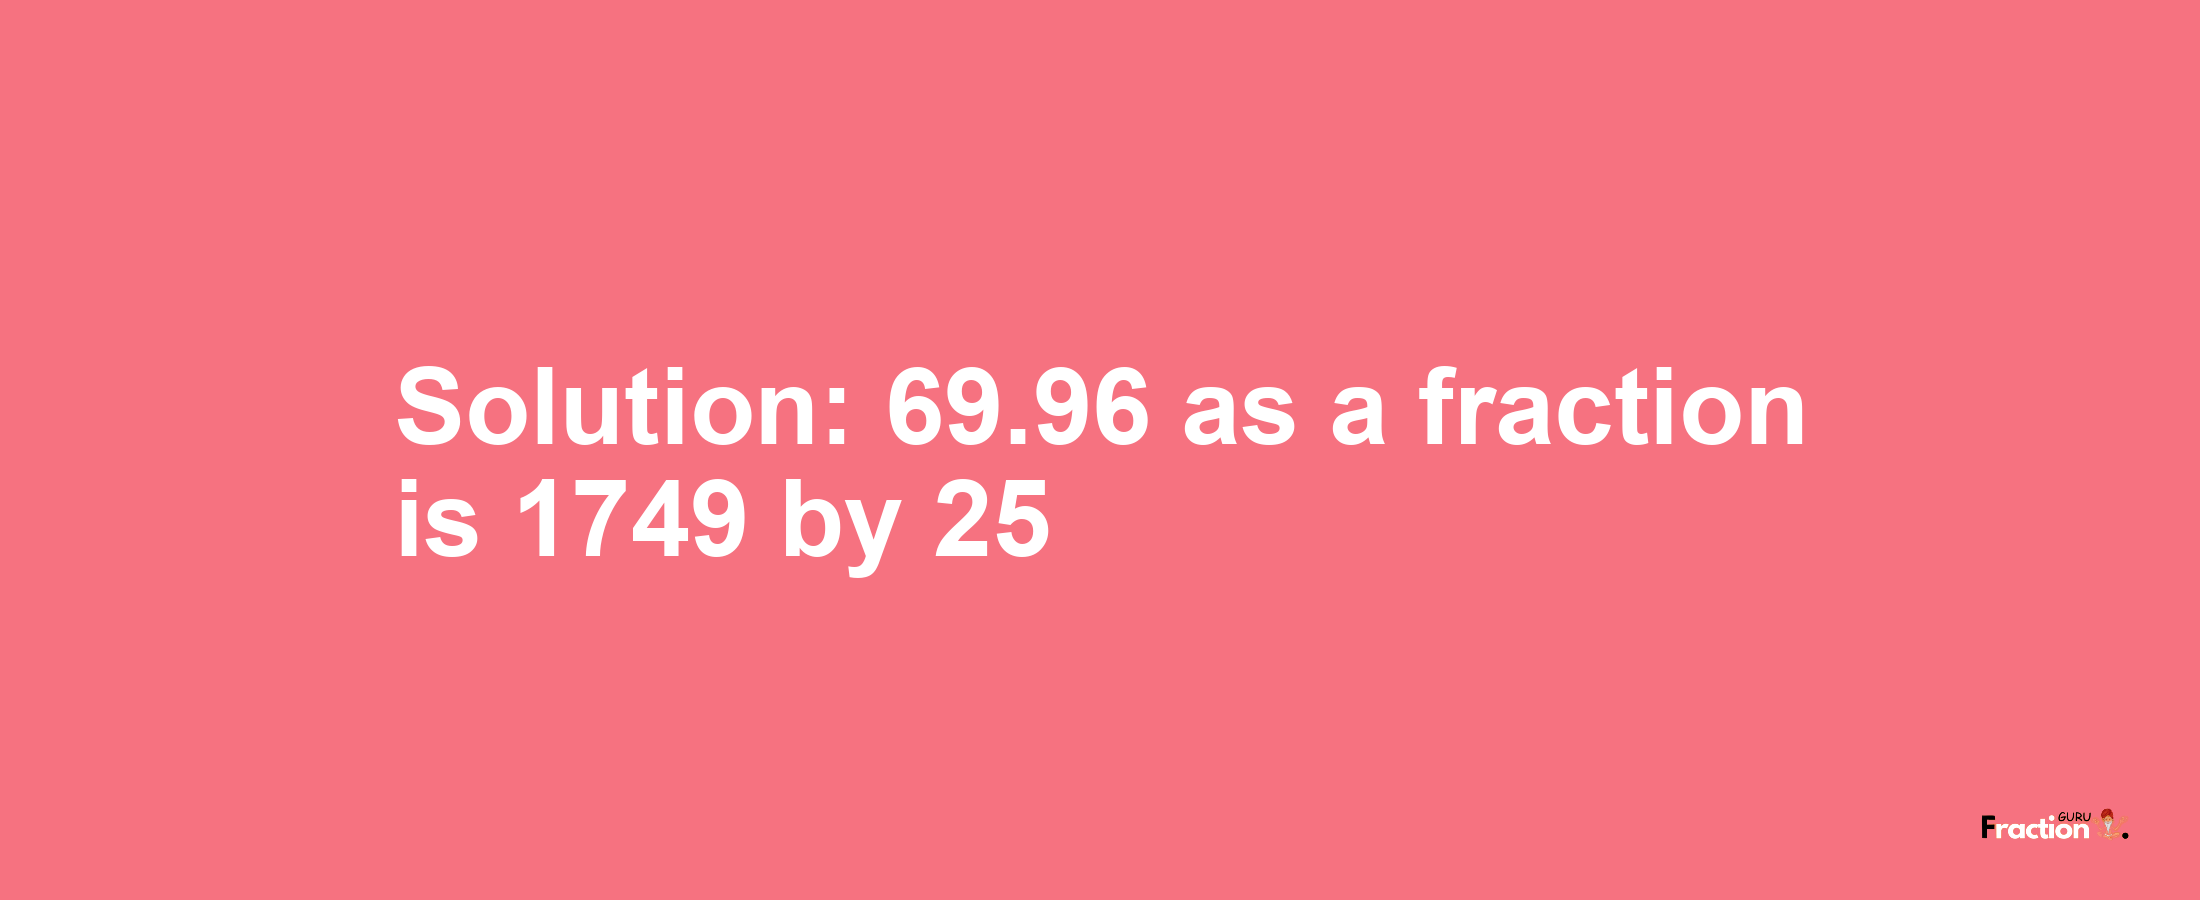 Solution:69.96 as a fraction is 1749/25